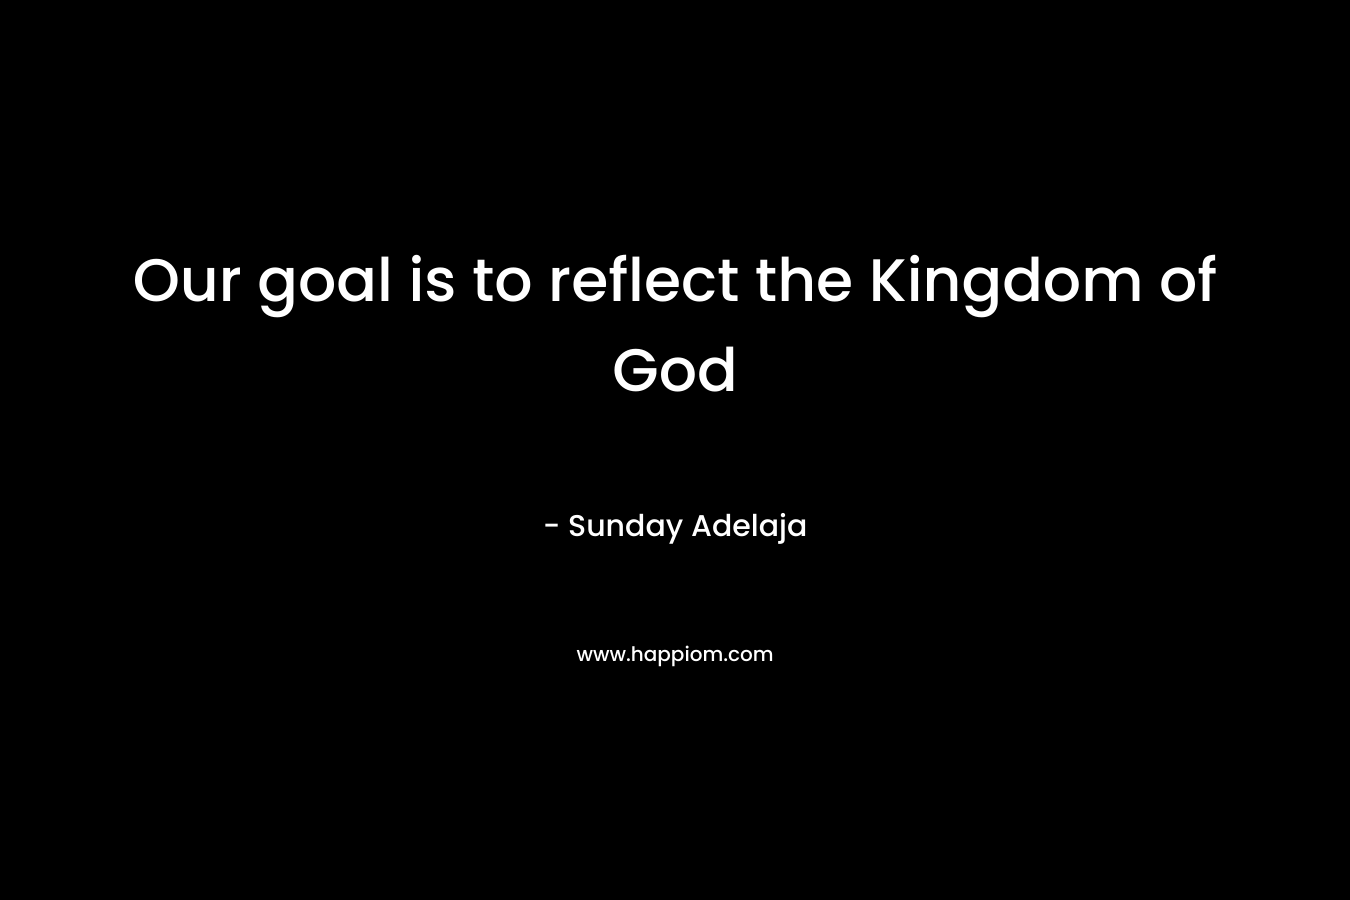 Our goal is to reflect the Kingdom of God